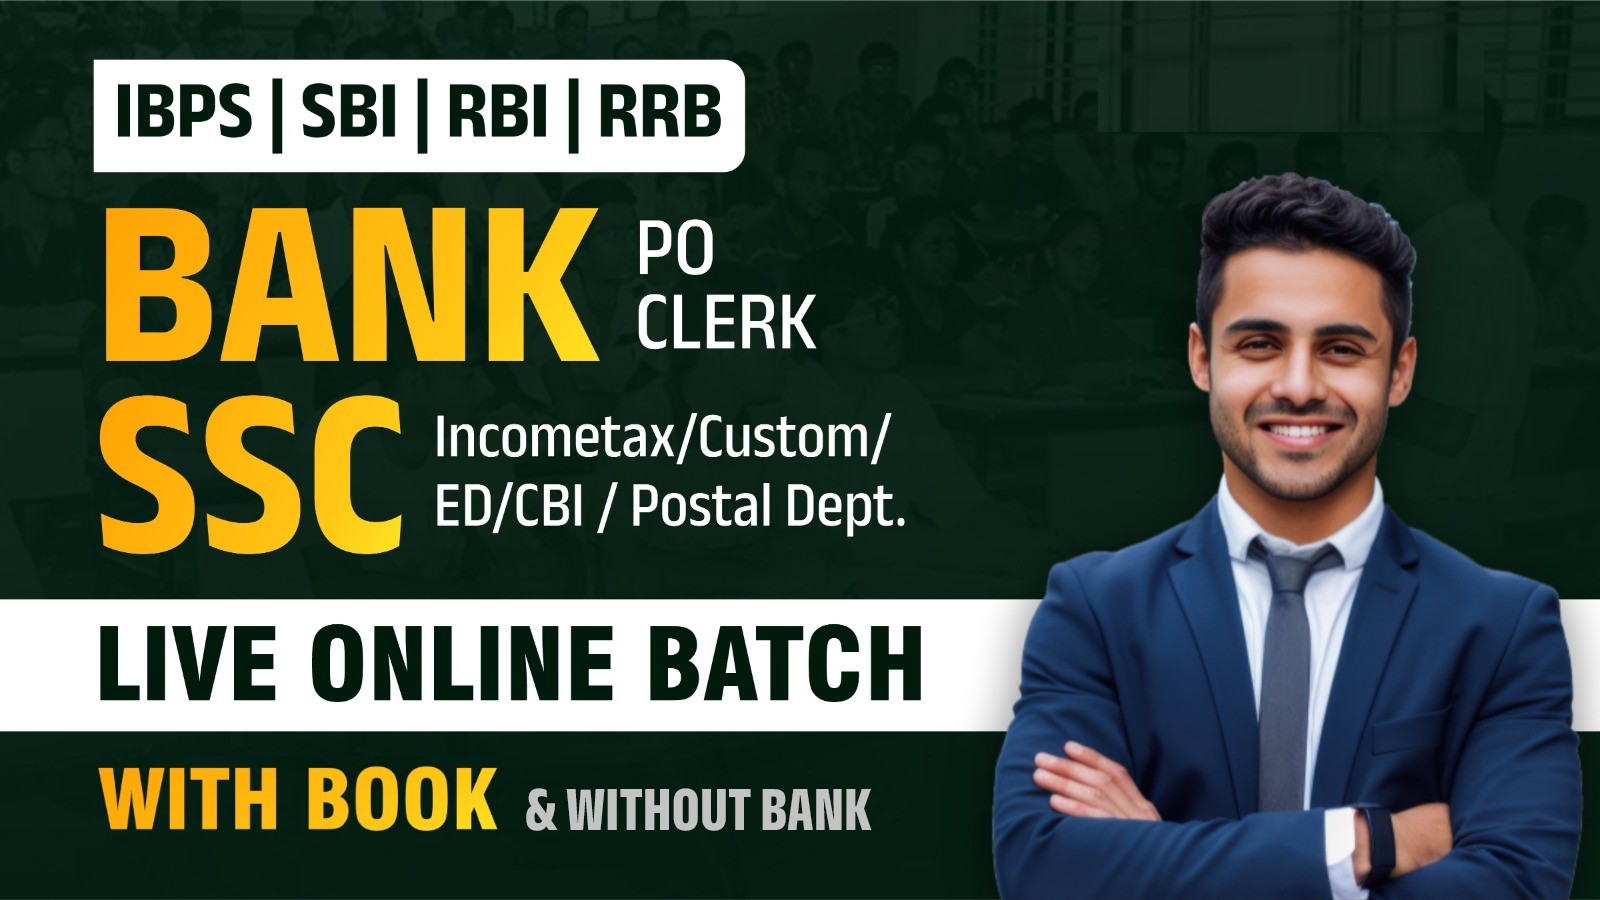 BANK PO & SSC (LIVE Online Batch) With Book & Without Book